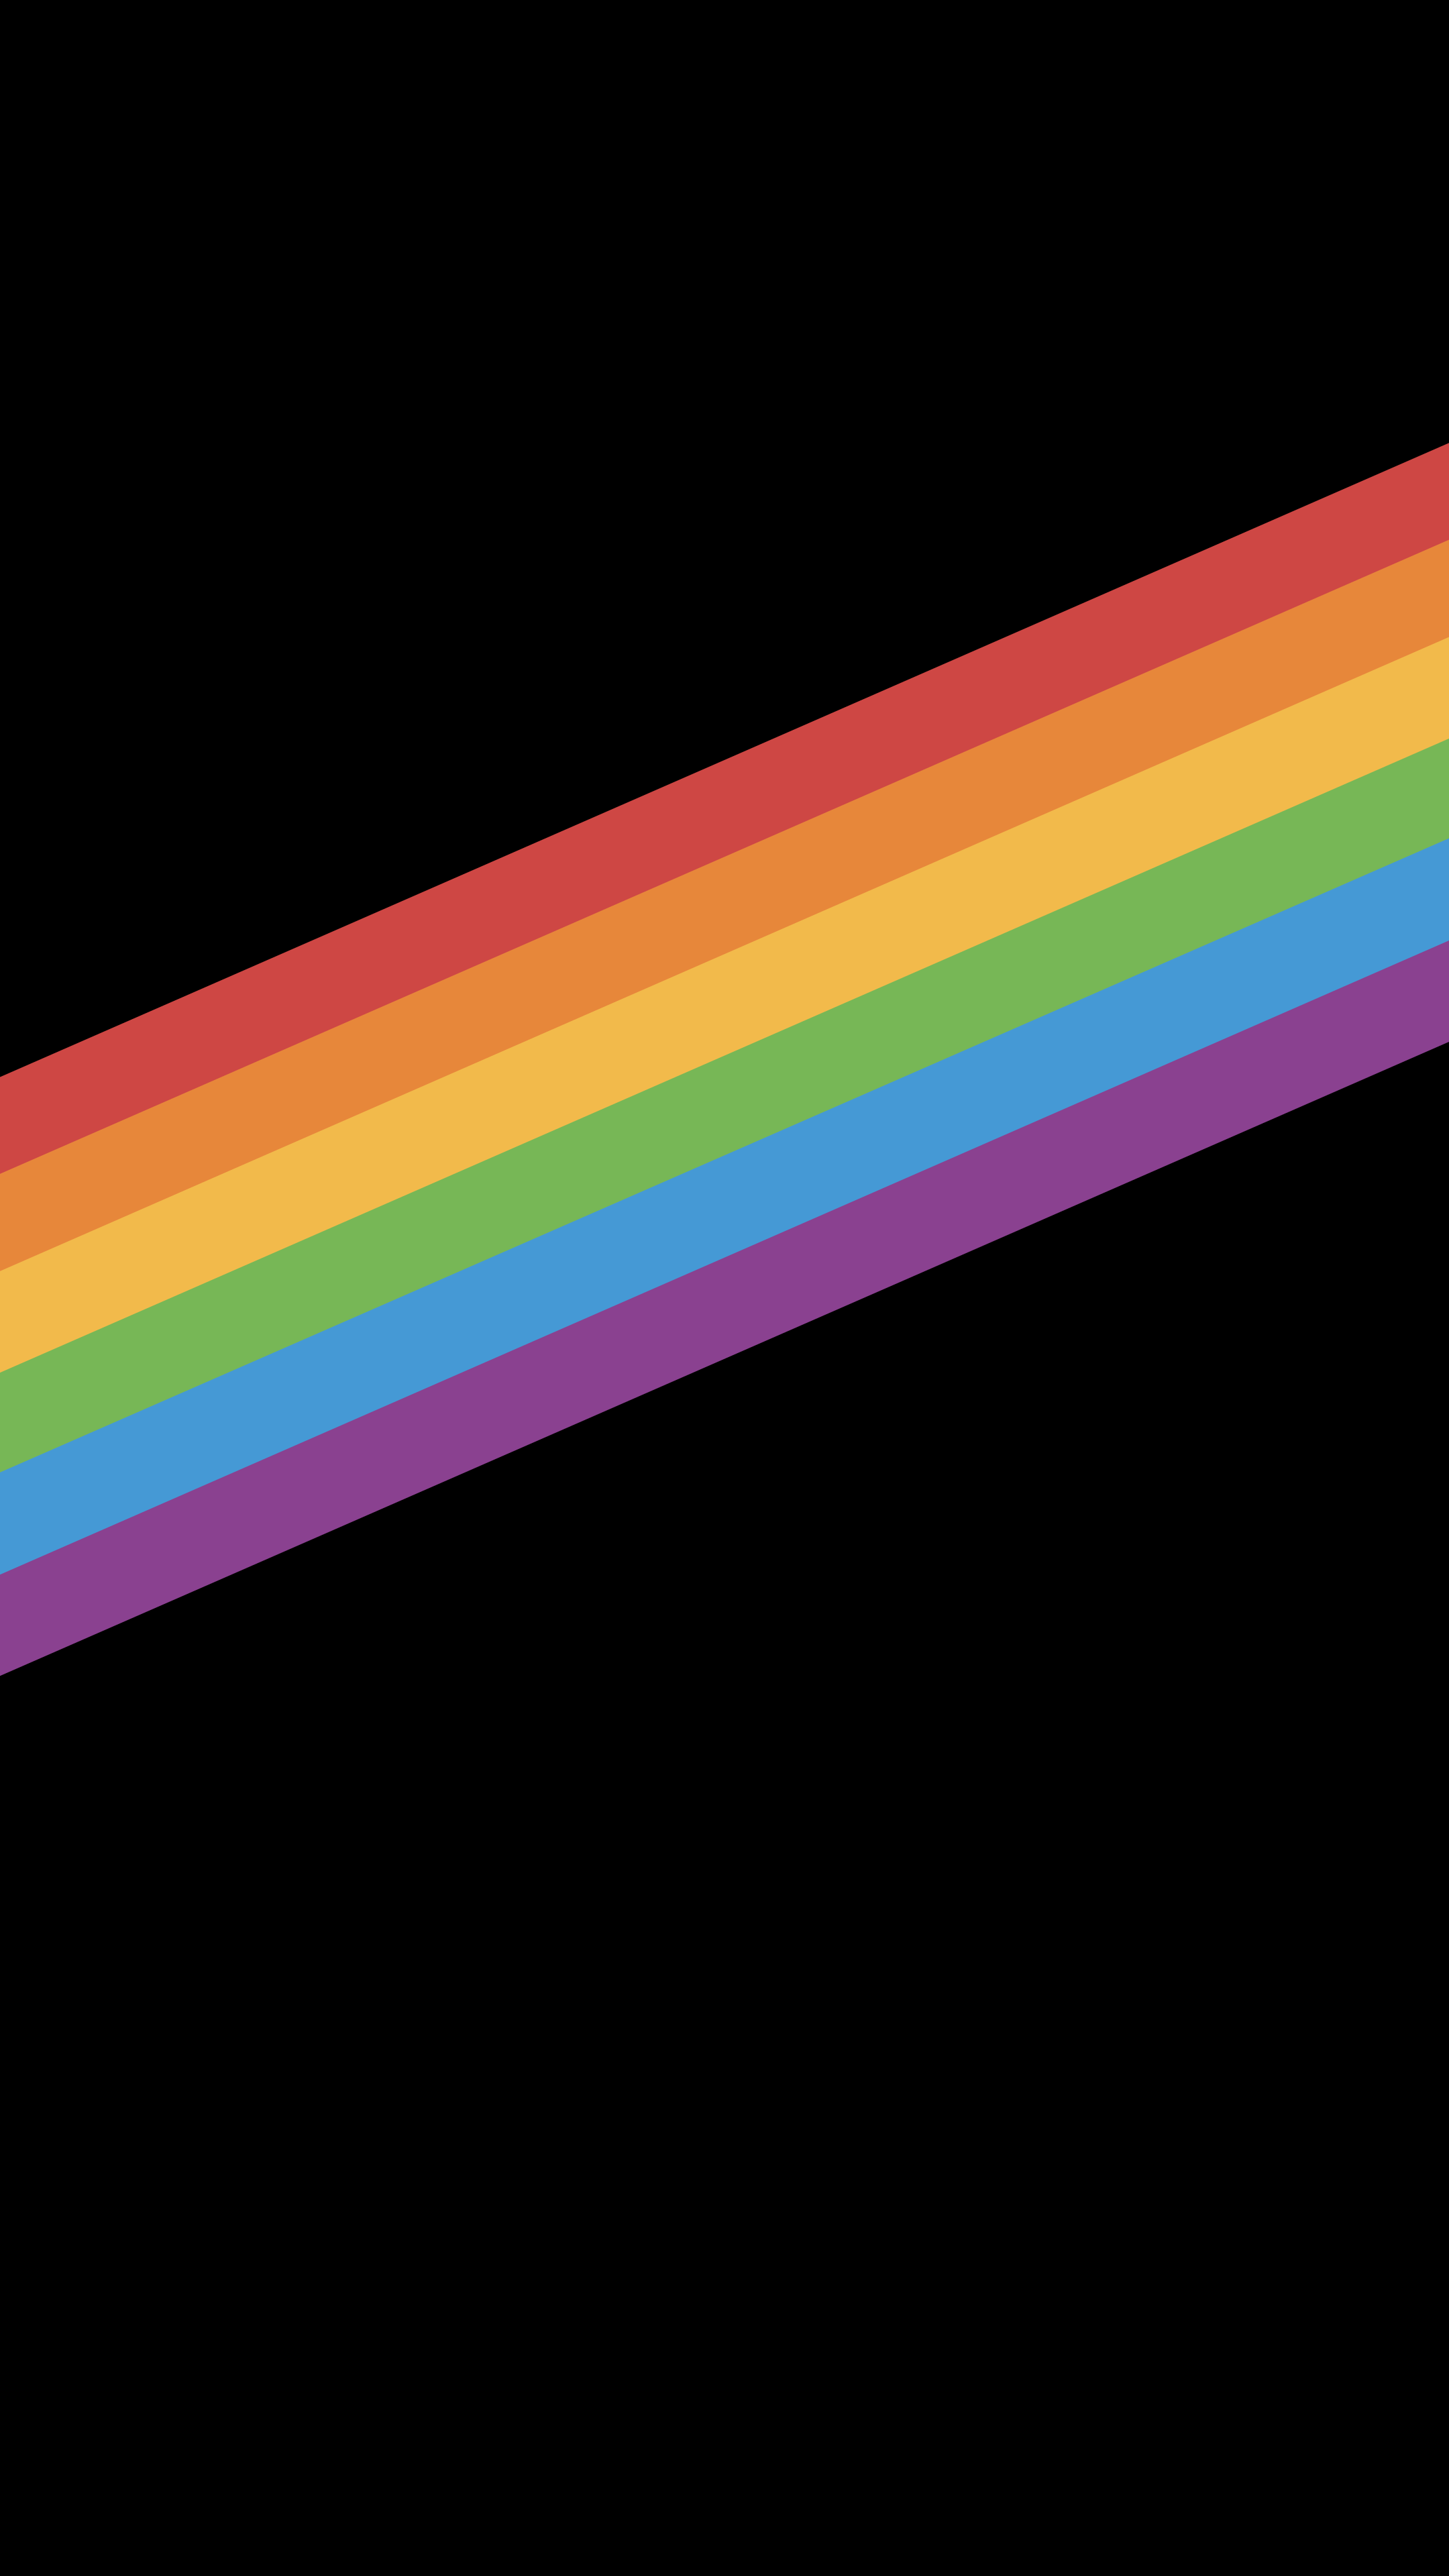 Picture Made this simple pride phone wallpaper back in June based